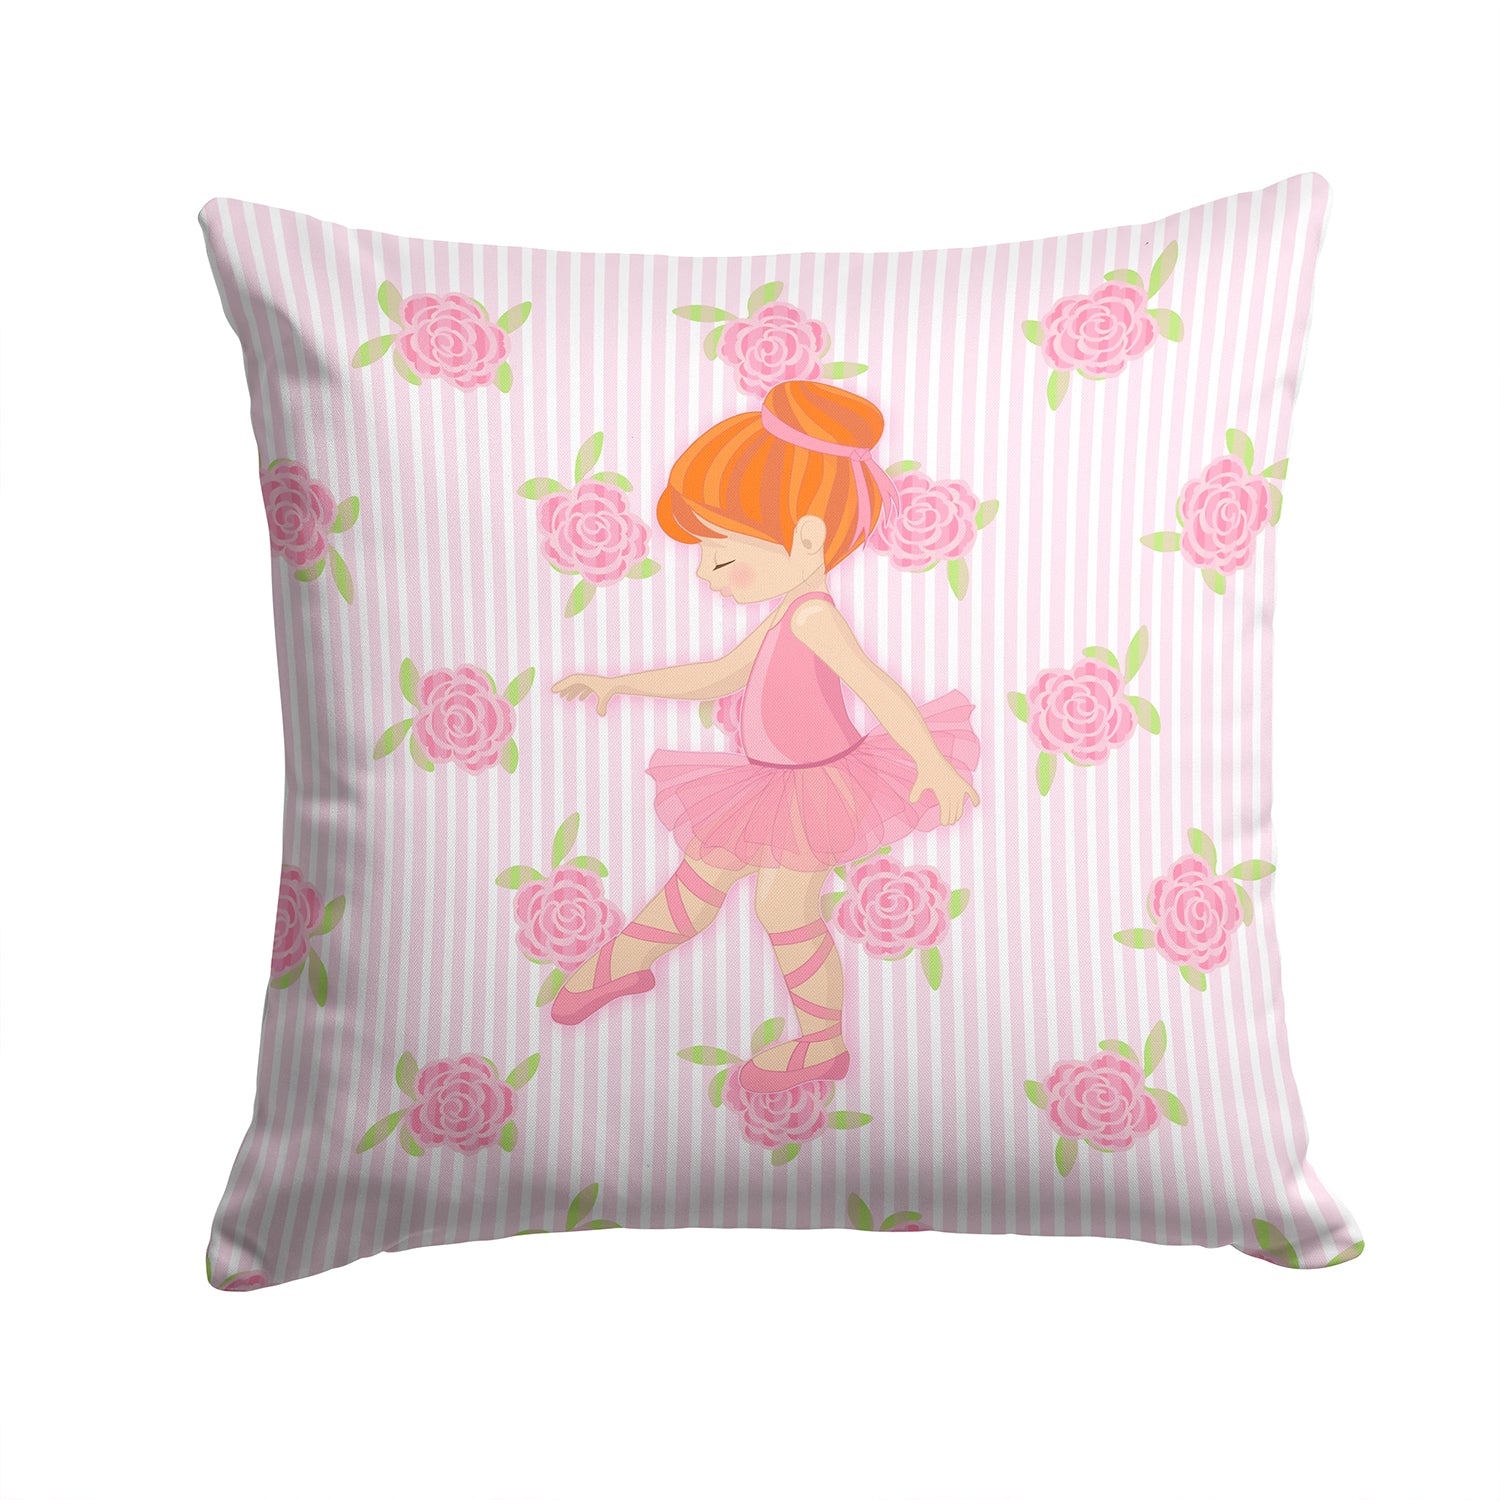 Ballerina Red Head Point Fabric Decorative Pillow BB5170PW1414 - the-store.com